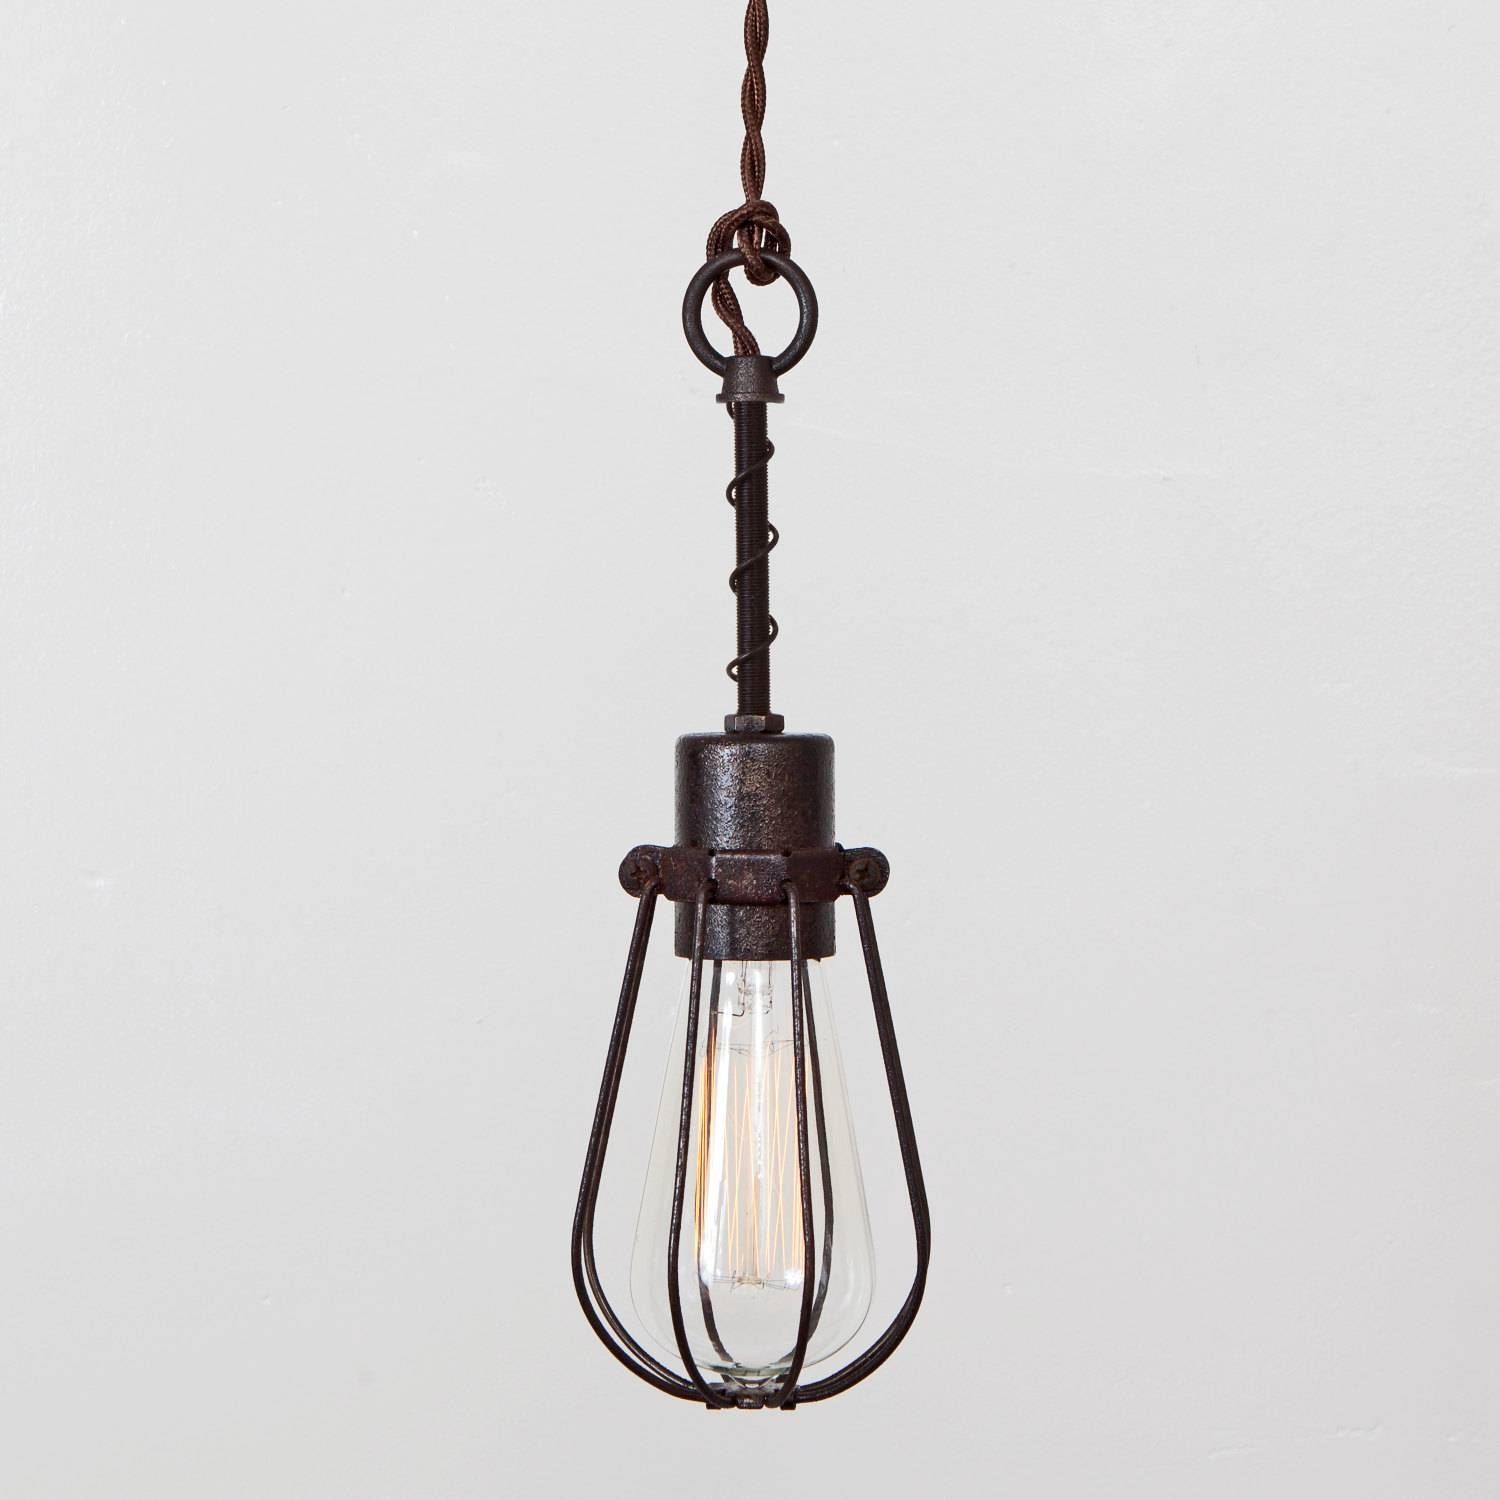 Oval Bulb Cage Light Pendant Light Industrial Hanging Light Pertaining To Plug In Hanging Pendant Lights (View 7 of 15)